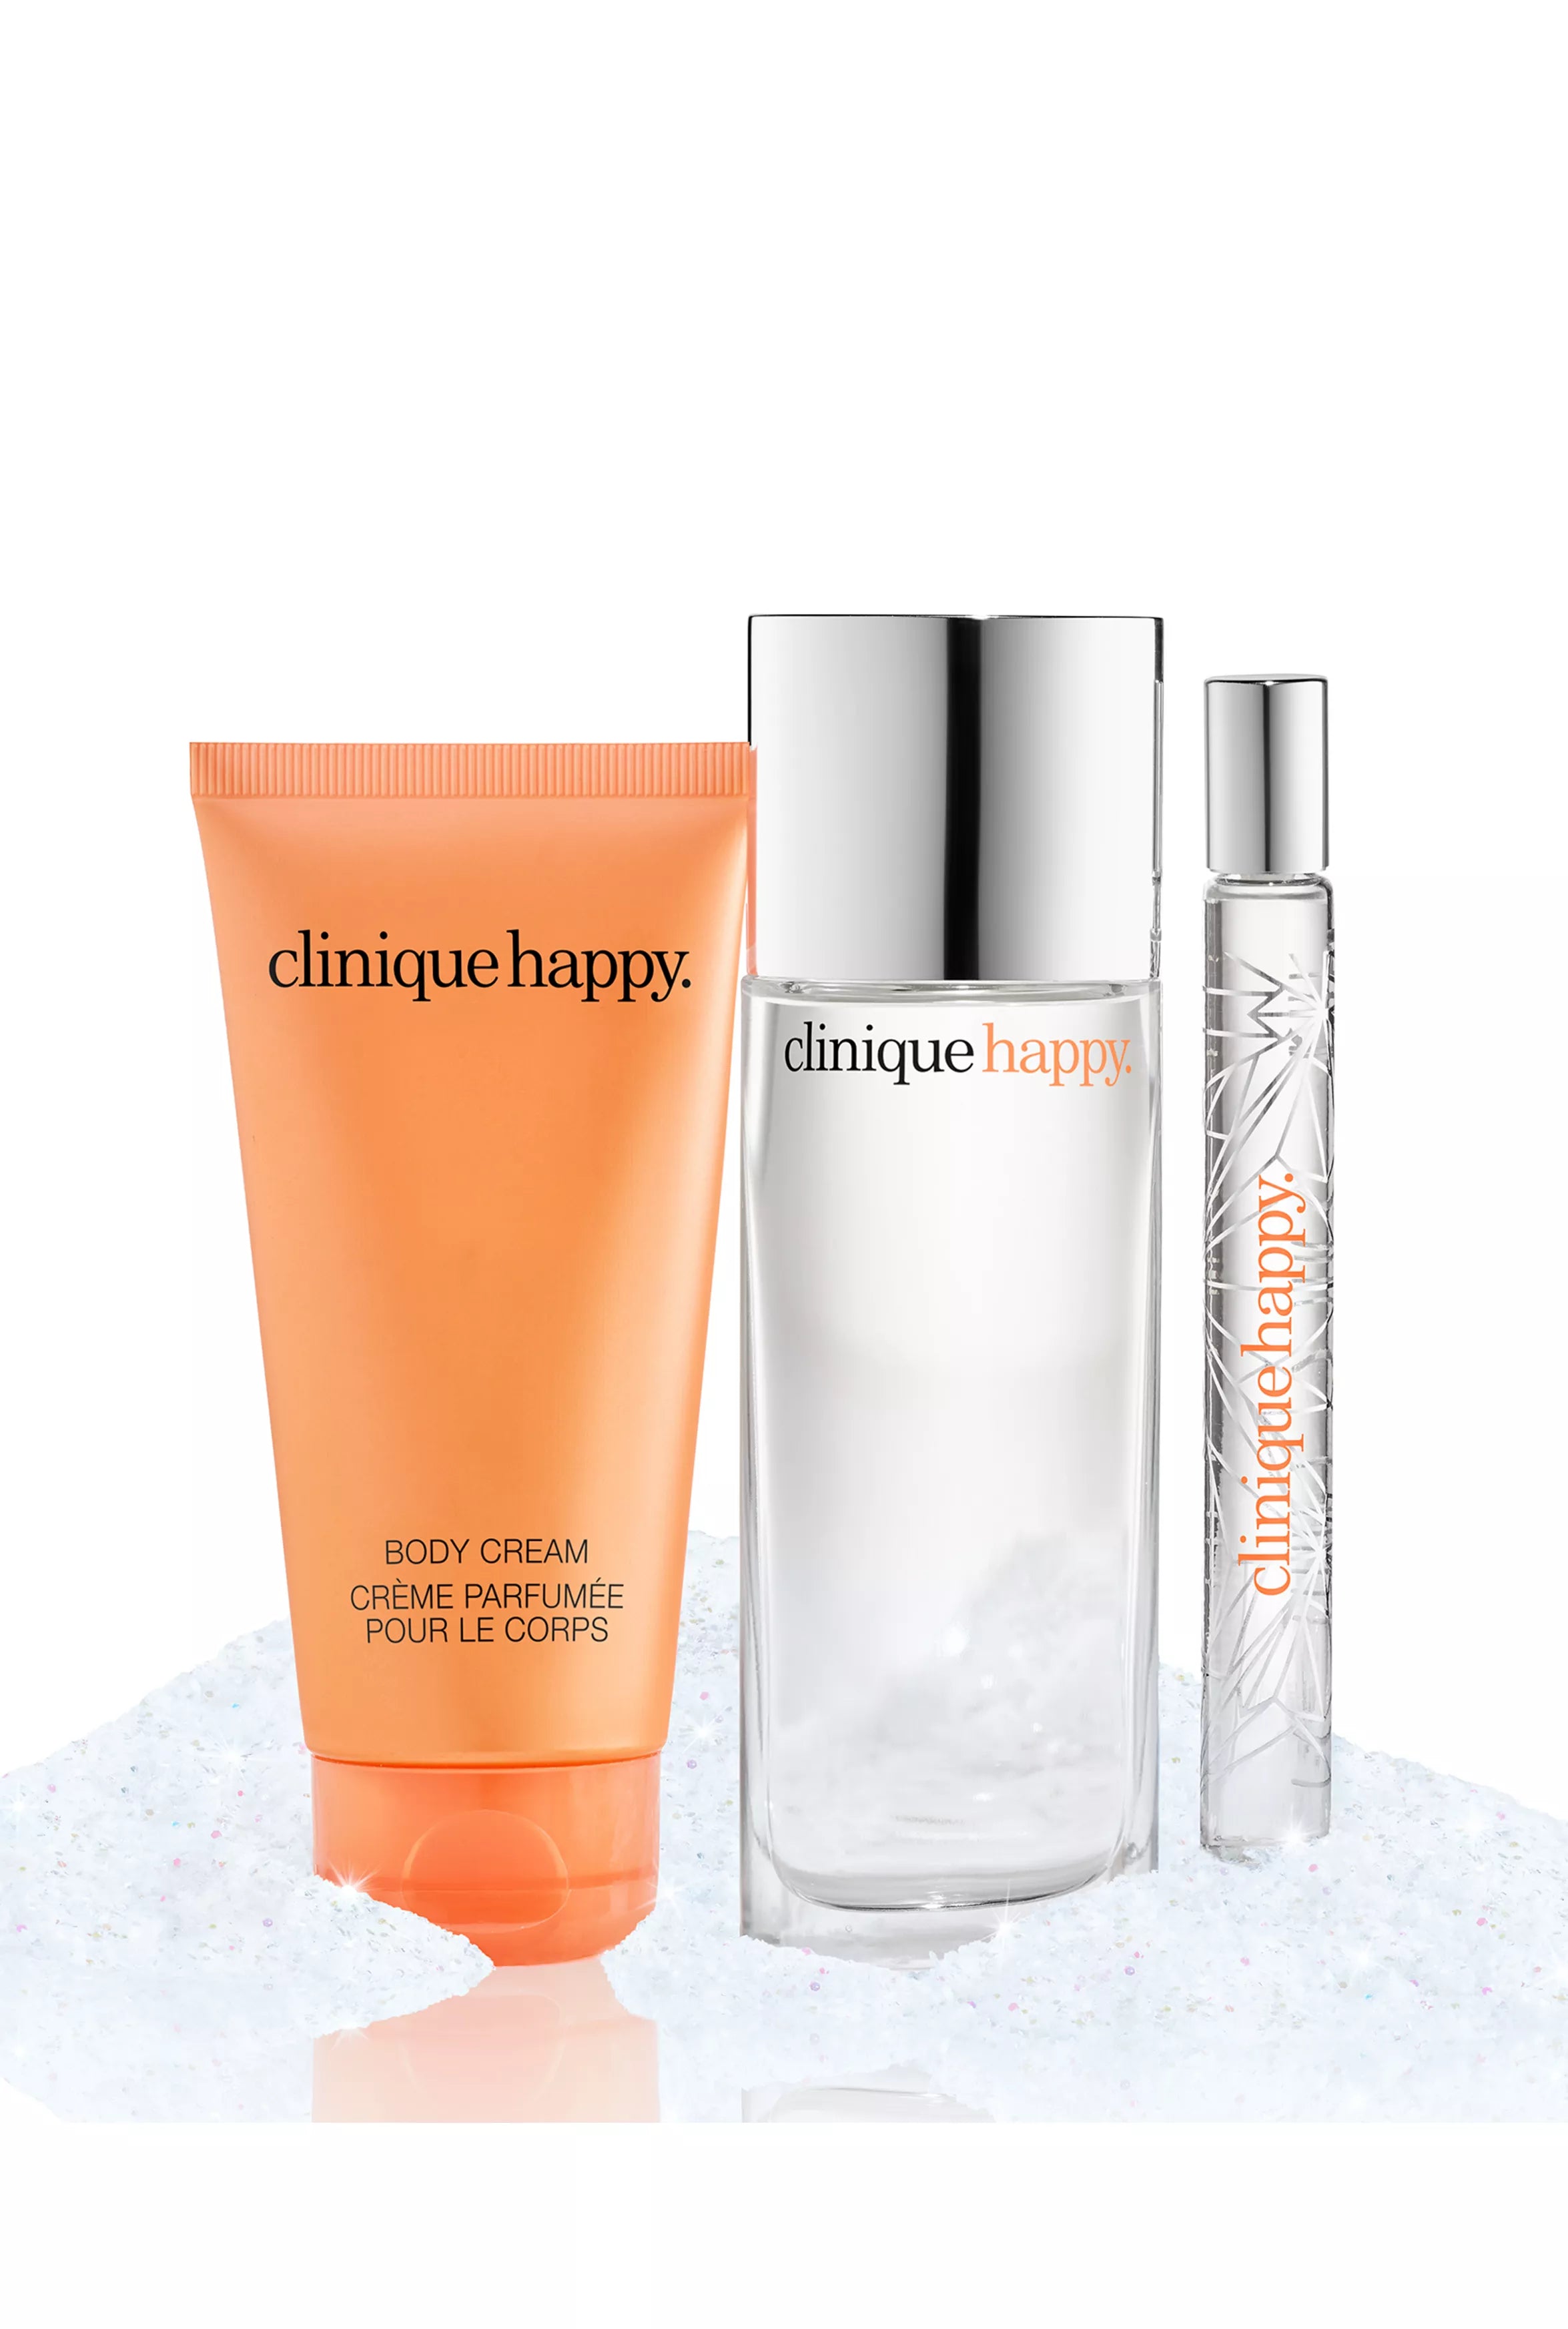 Clinique Perfectly Happy Fragrance Set (Value $114)